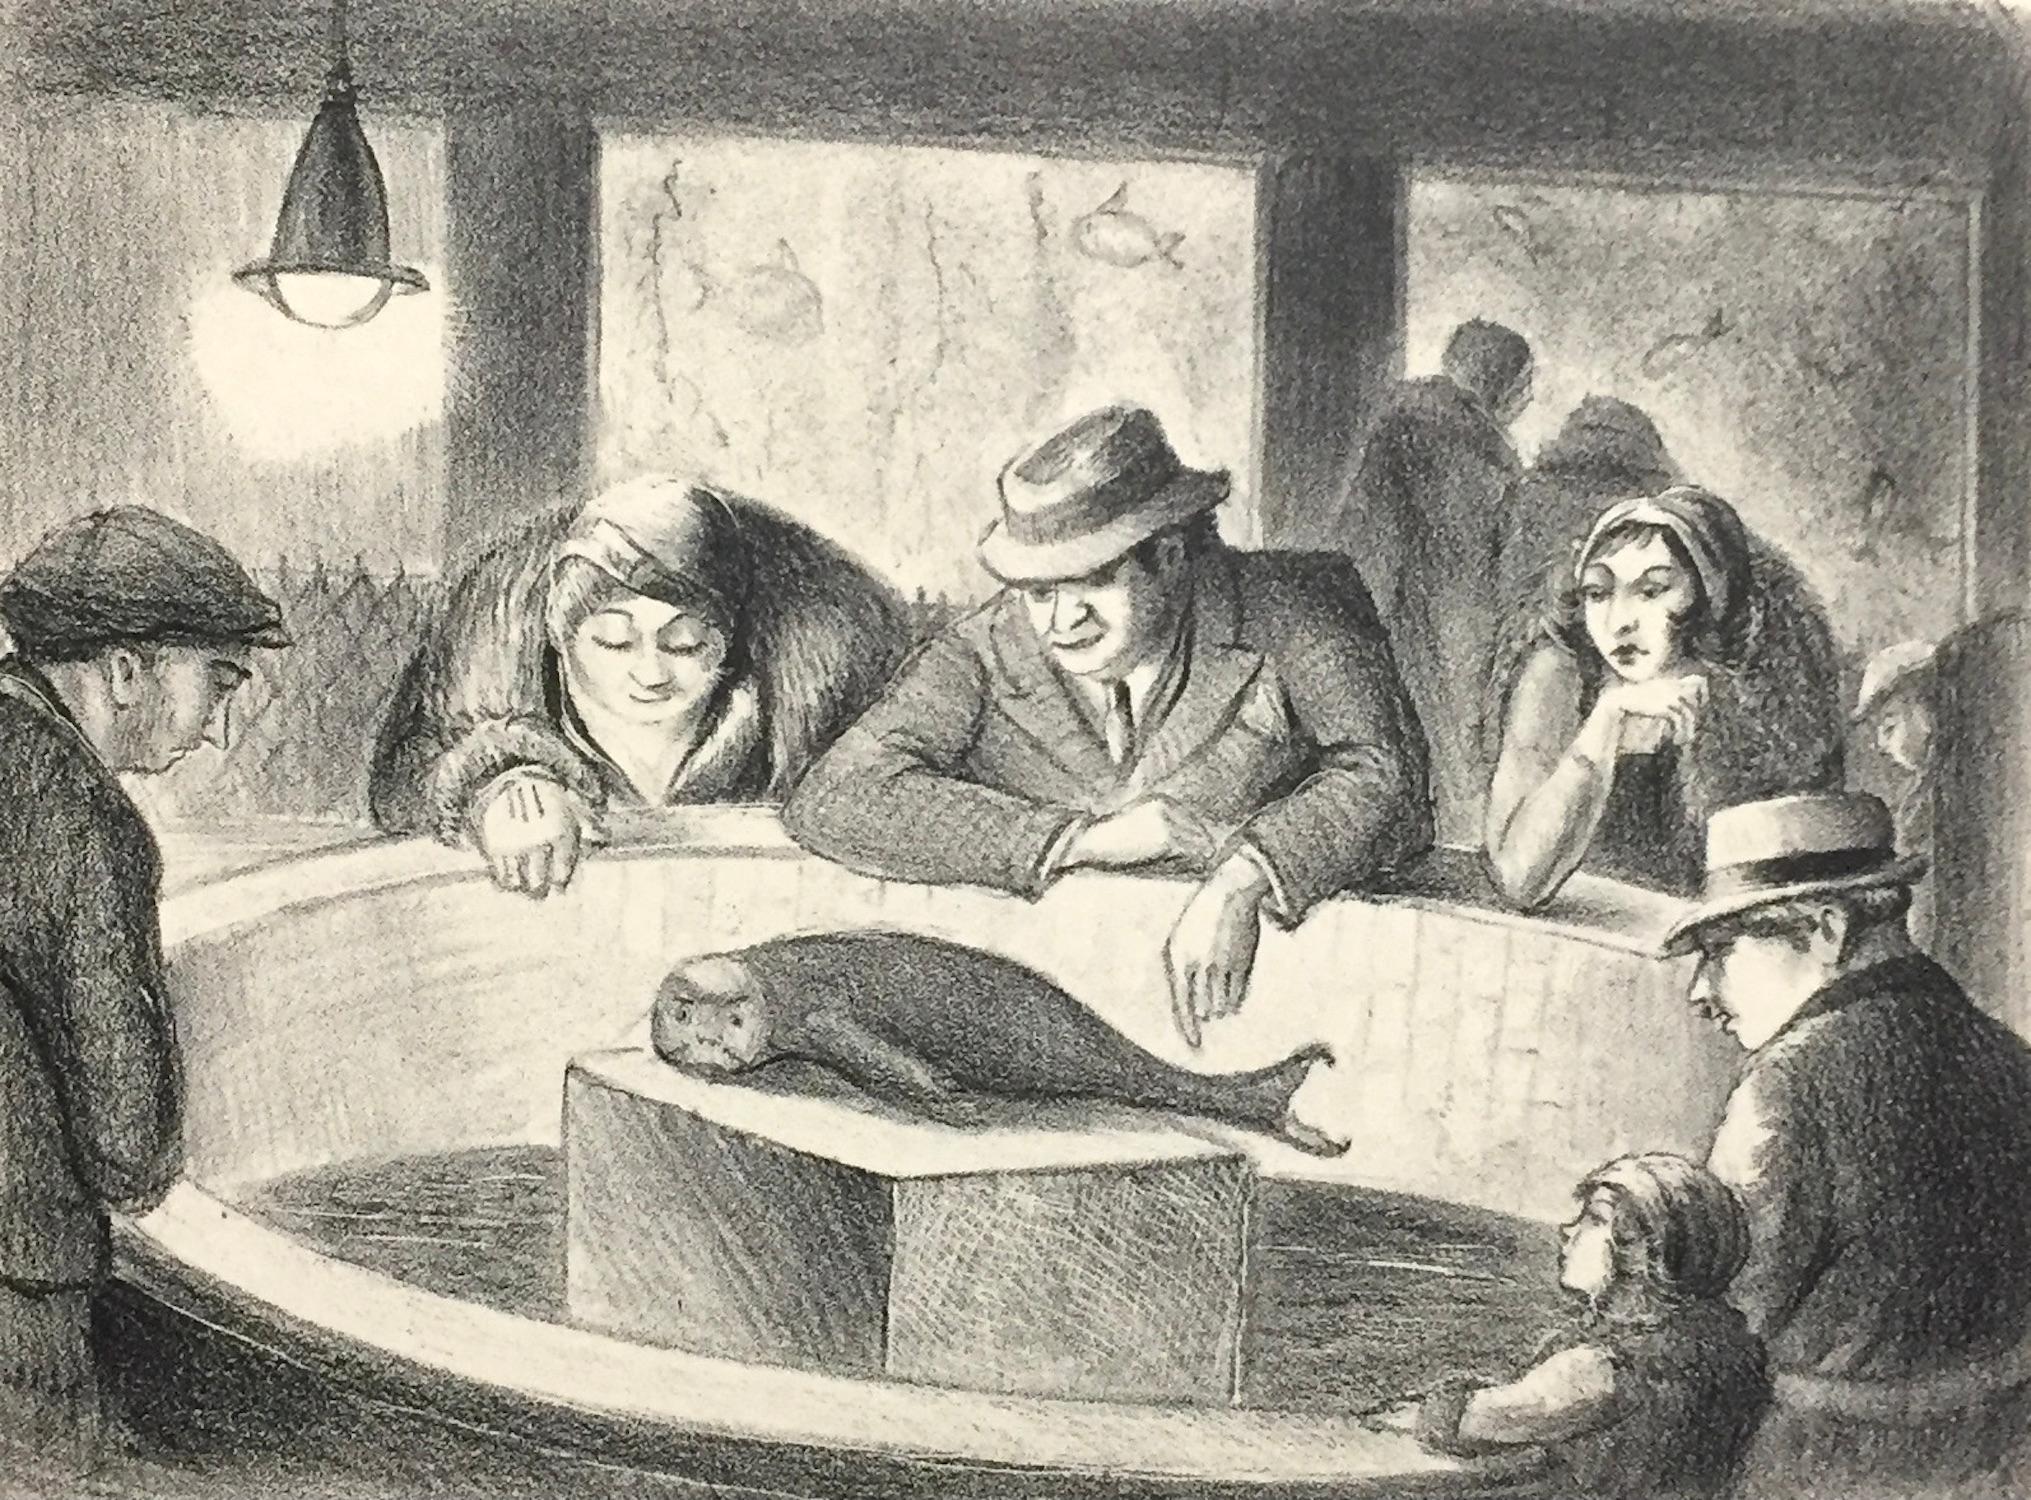 Gregory often worked in lithography, probably learned at the Art Students League in New York City. In all likelihood this is a New York scene but he also often drew New England subjects. 
It is signed, titled, and dated, in pencil.